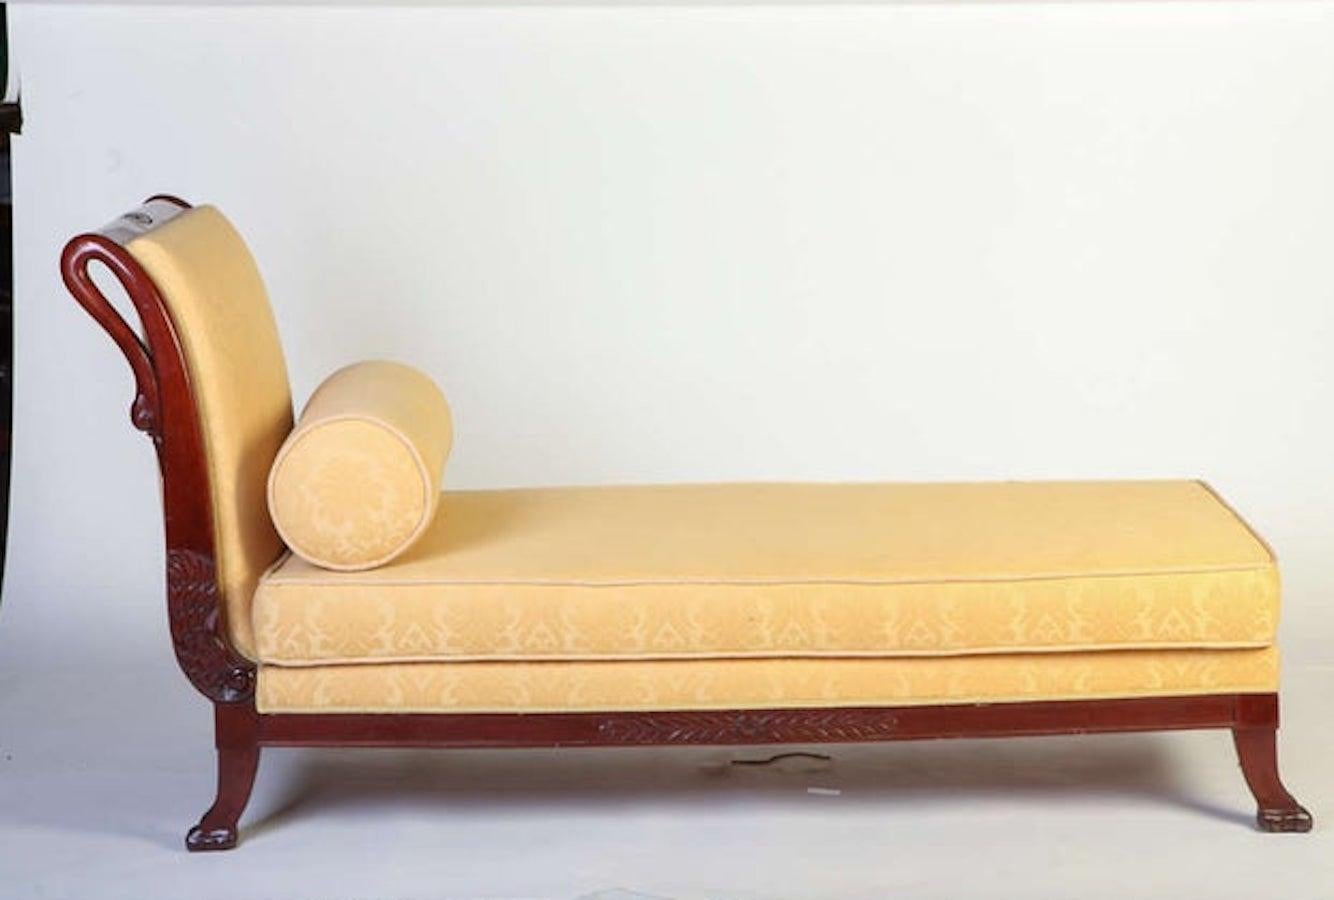 A fine tuscany mahogany swan neck sofa
The front side of the curved arm ends on carved swan, The settee rests on four lion paw feet.
 Upholstery in a very good condition.